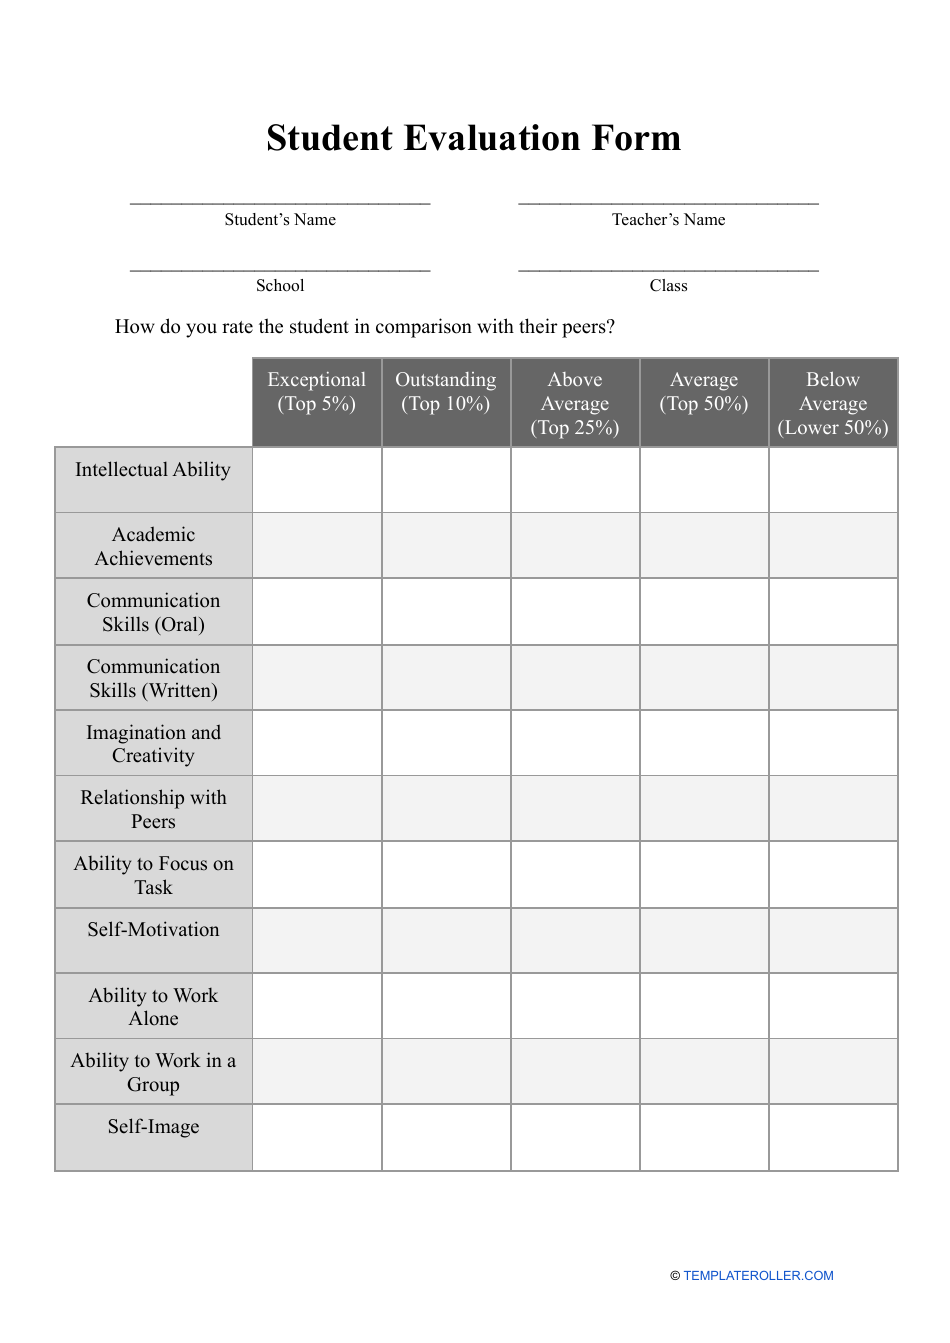 Student Evaluation Form - Table, Page 1